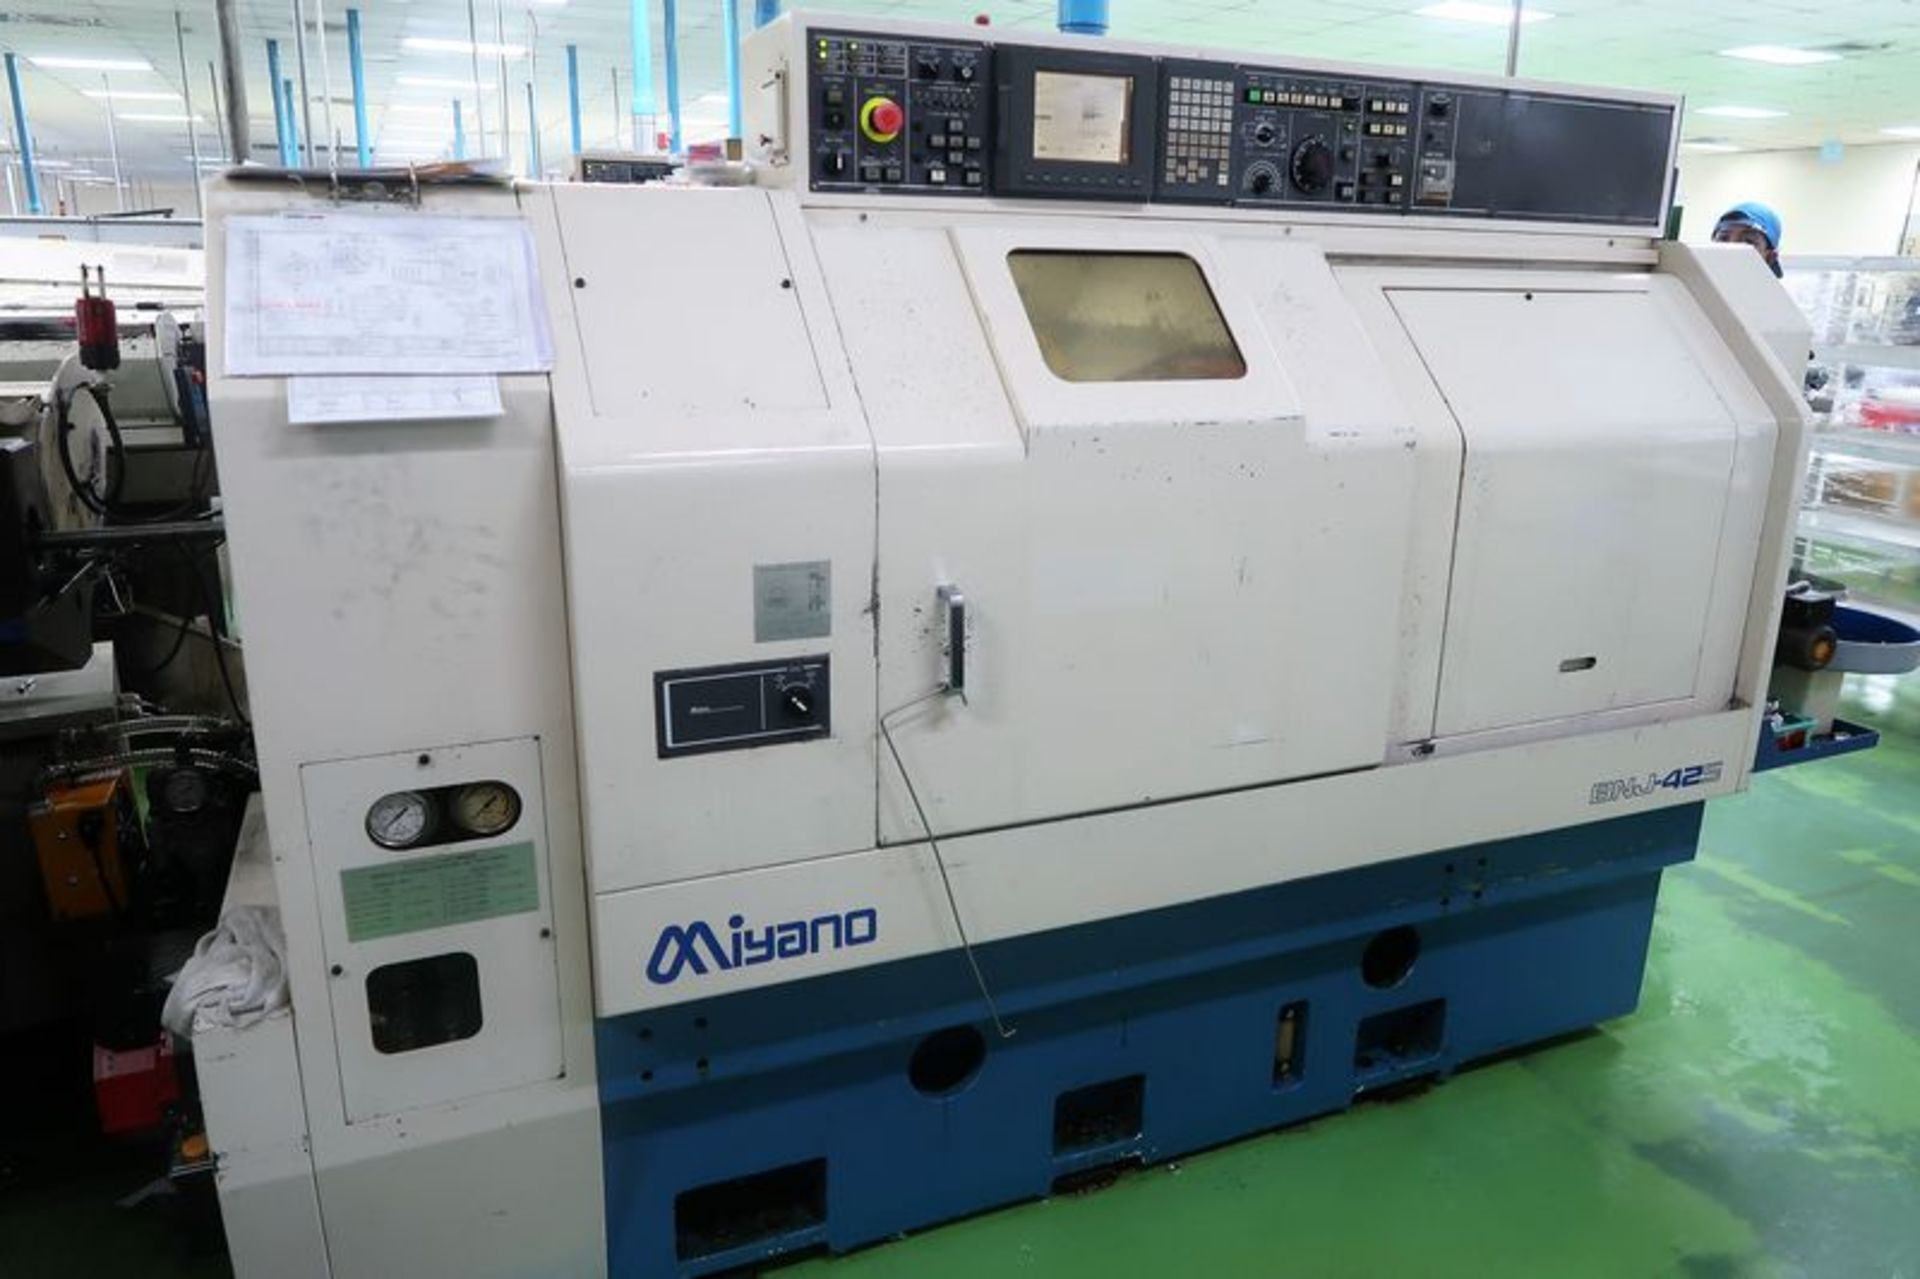 Miyano BNJ-42S 2 Spindle, 2 Turrets, Live Tools, C-Axis, S/N BN85608S new 2007